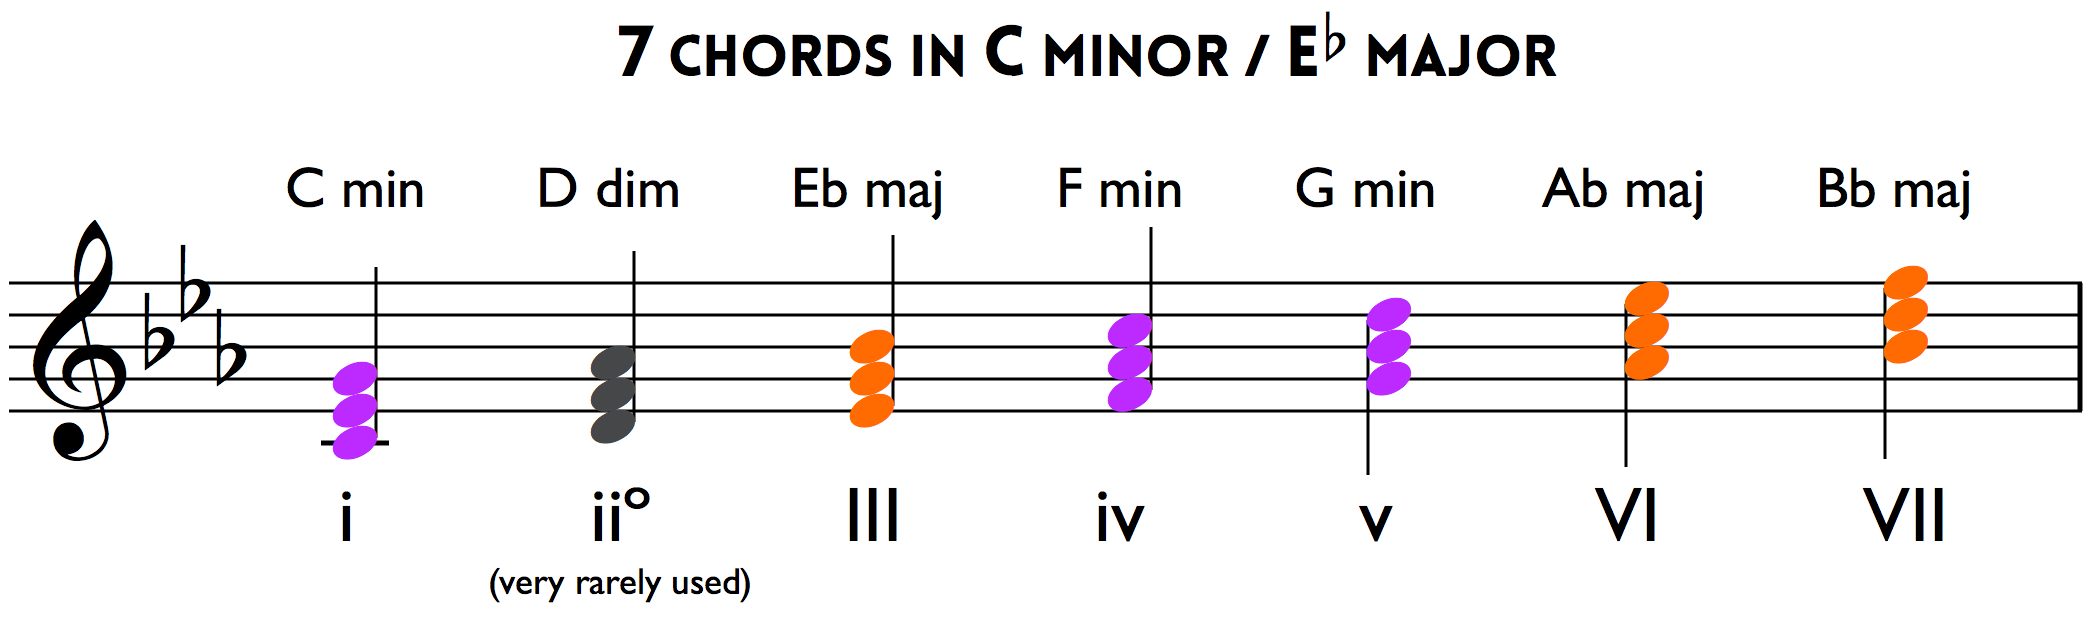 Minor scale chords